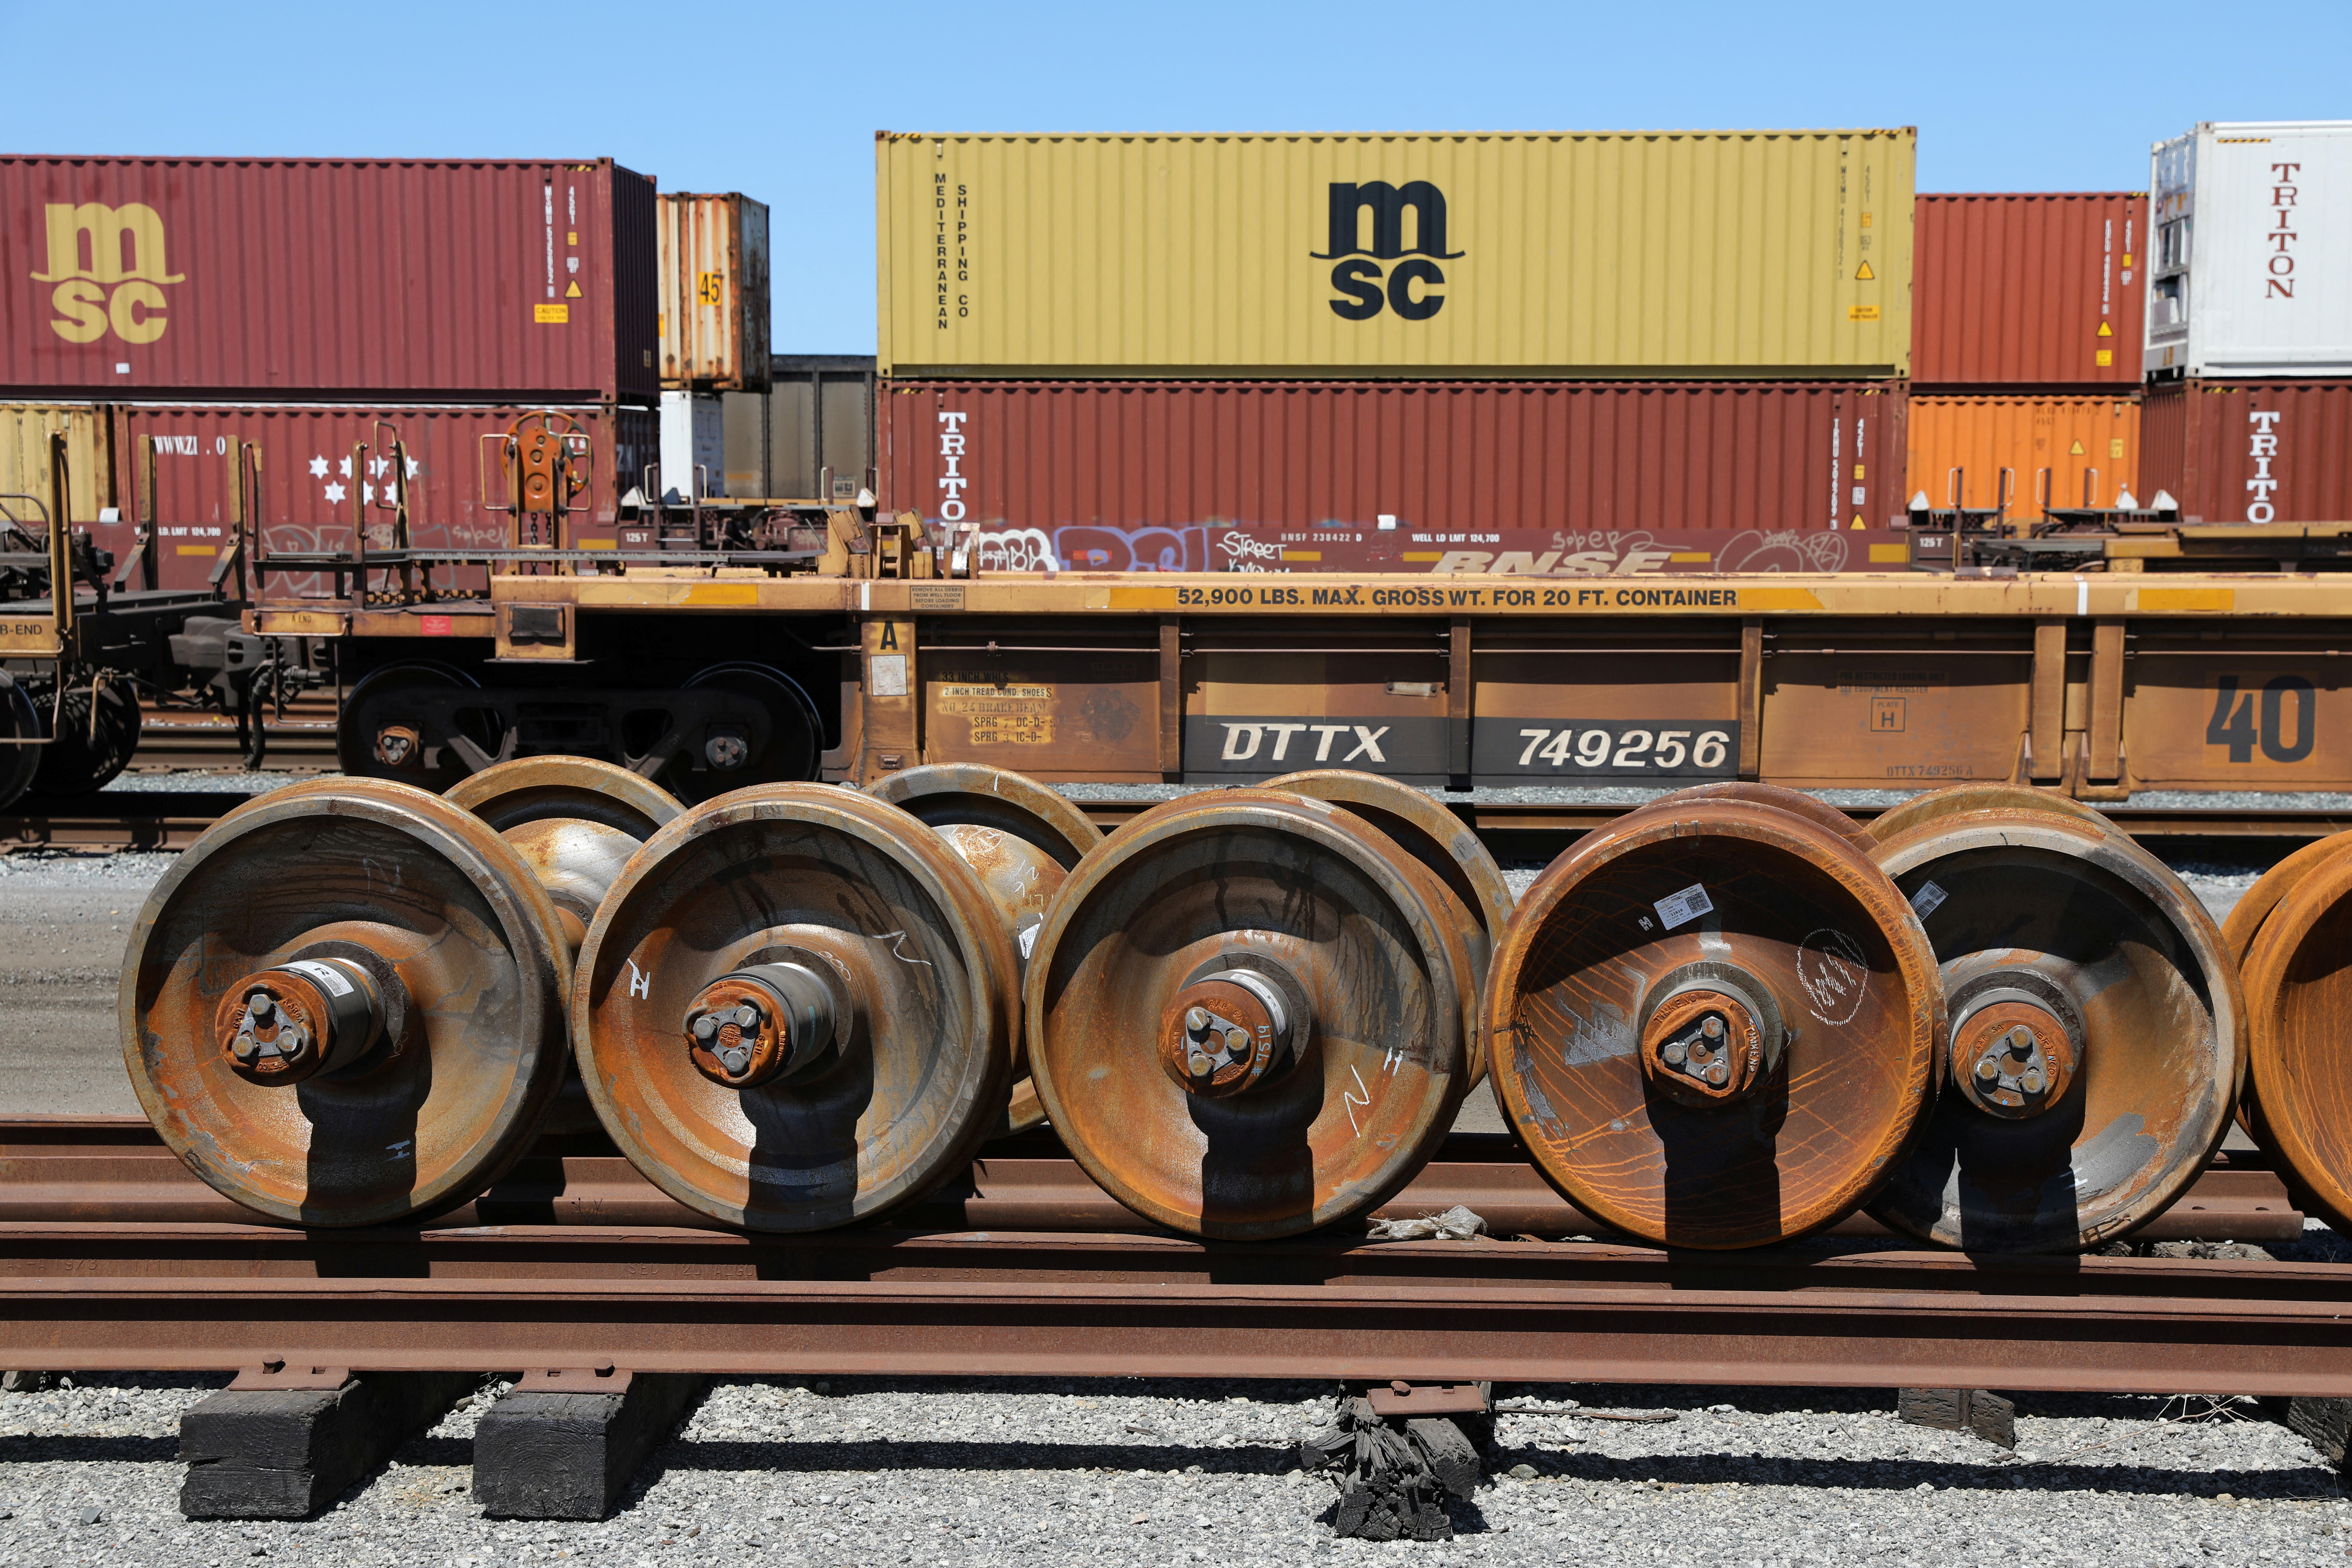 Train wheels are stored next to shipping containers on rail cars at Roberts Bank Superport in Delta